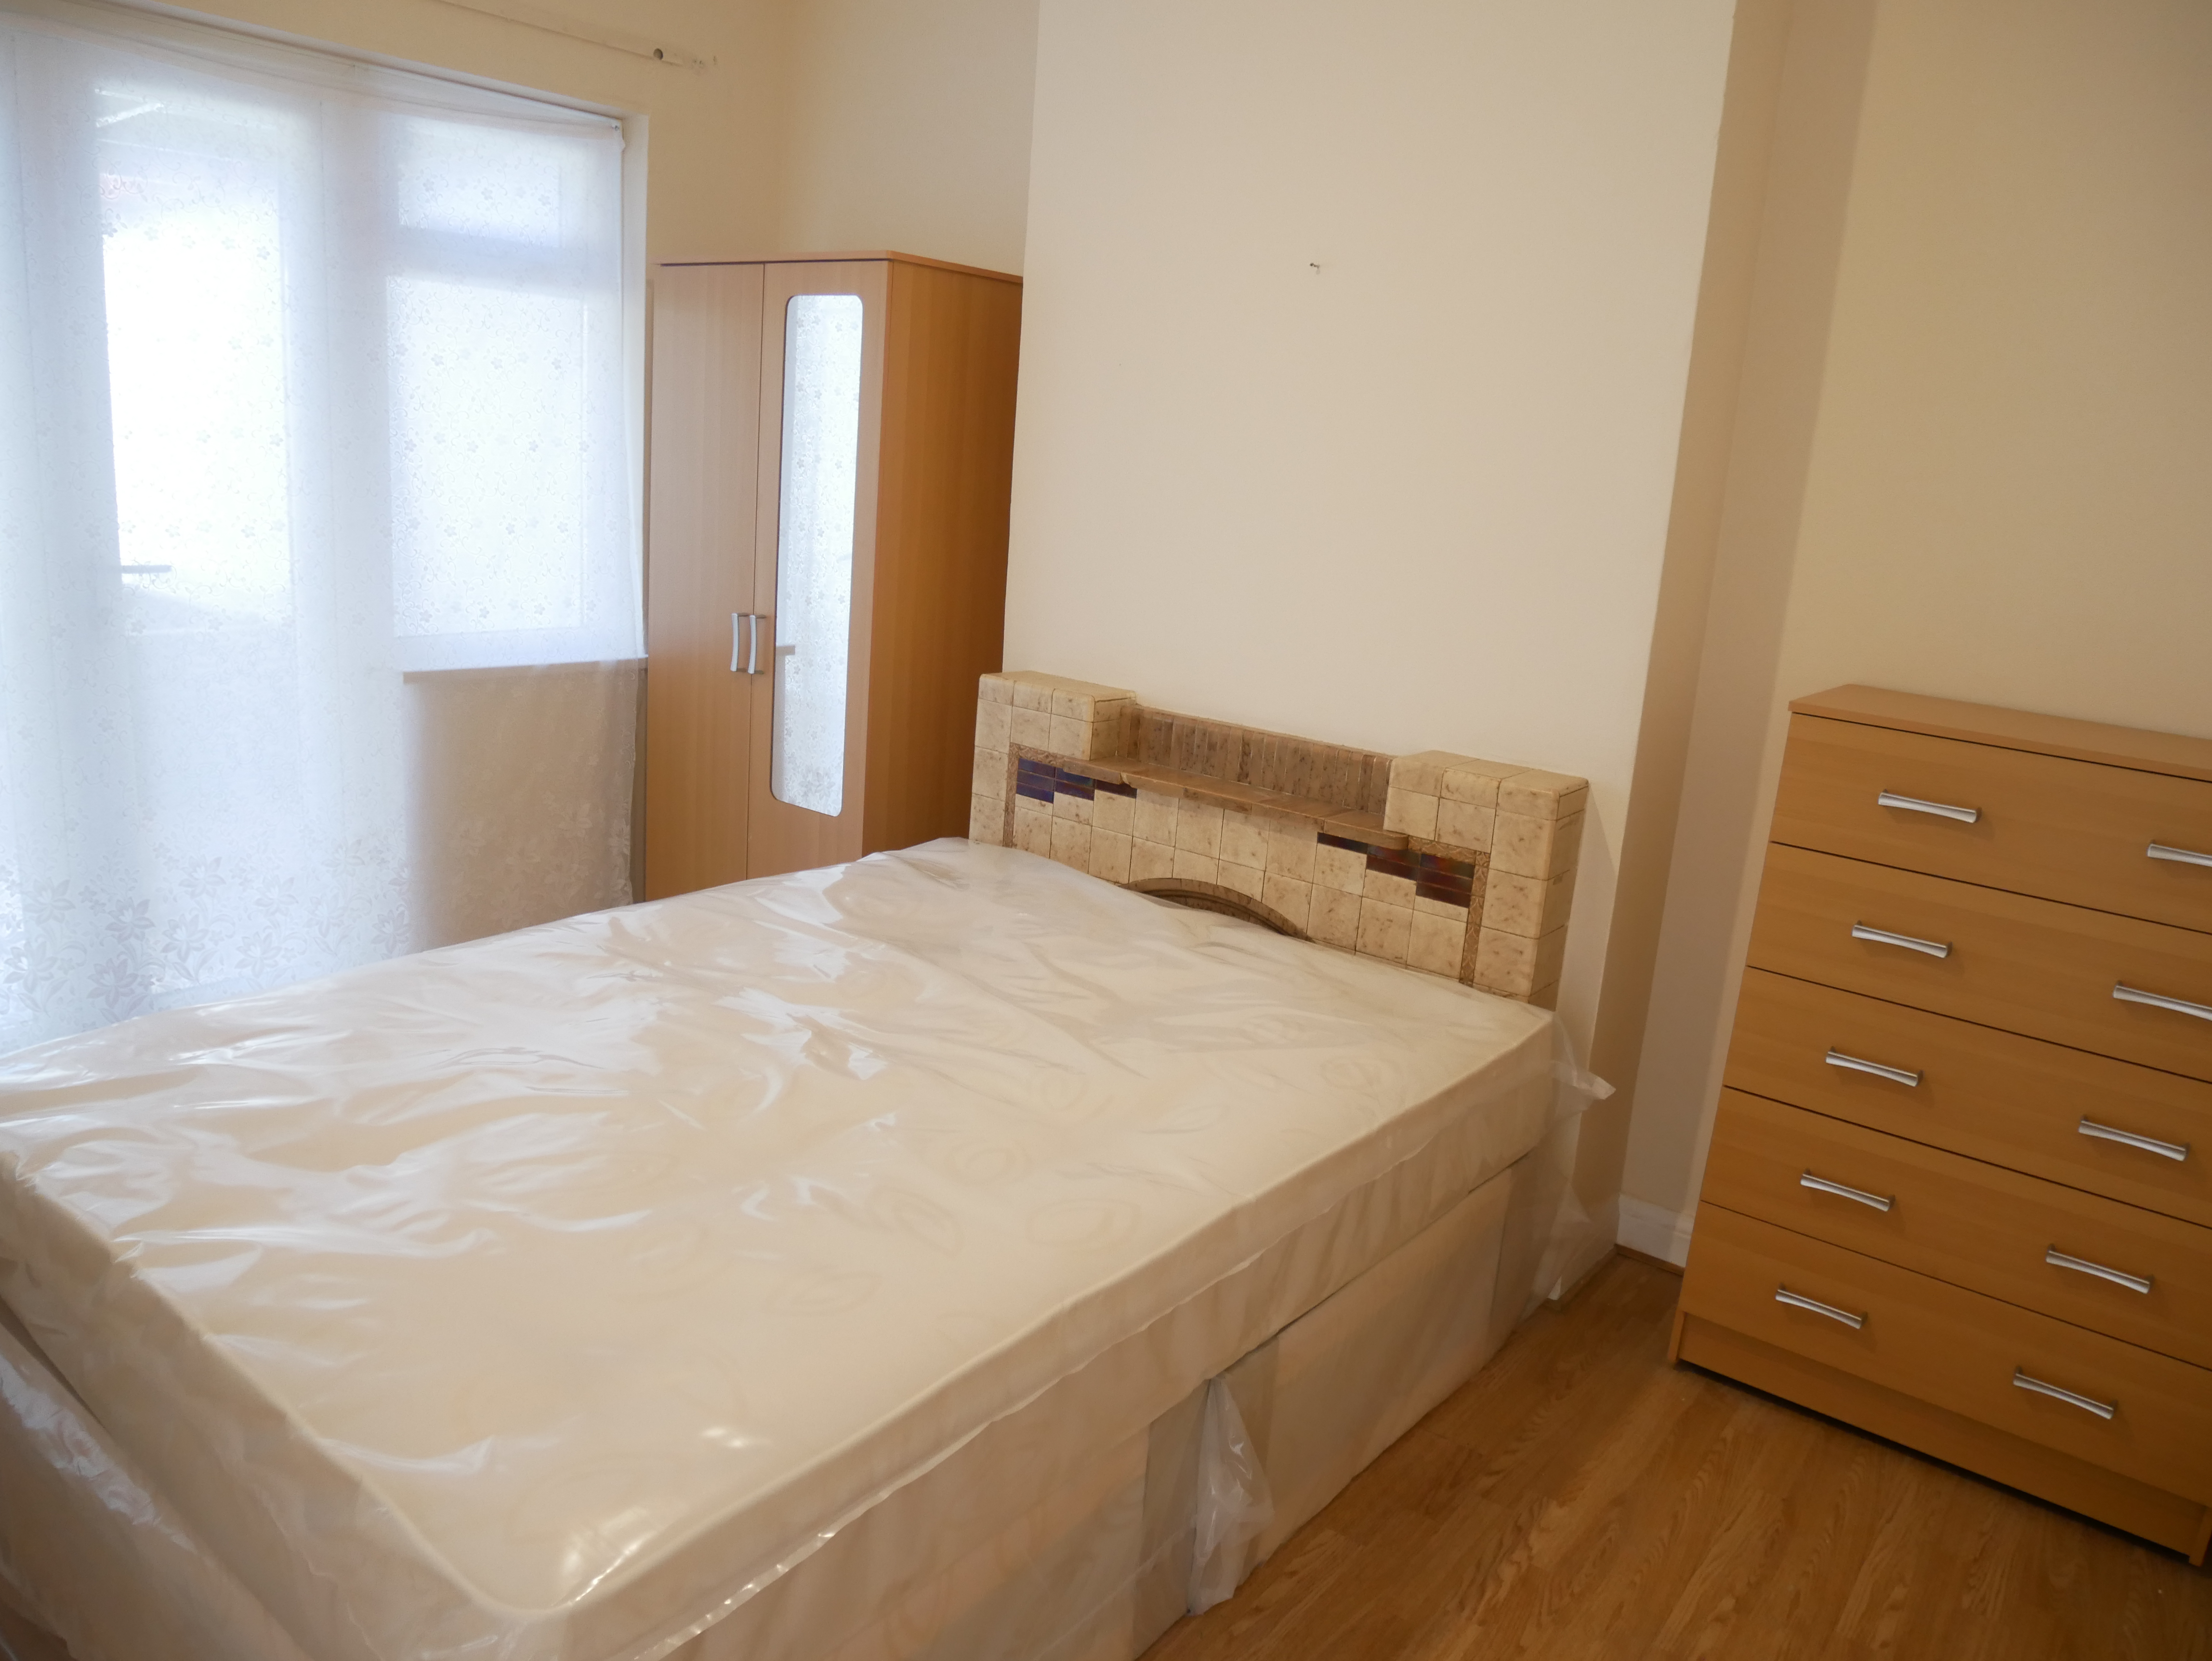 Ground floor Double Room for Rent / The Approach / East Acton W3